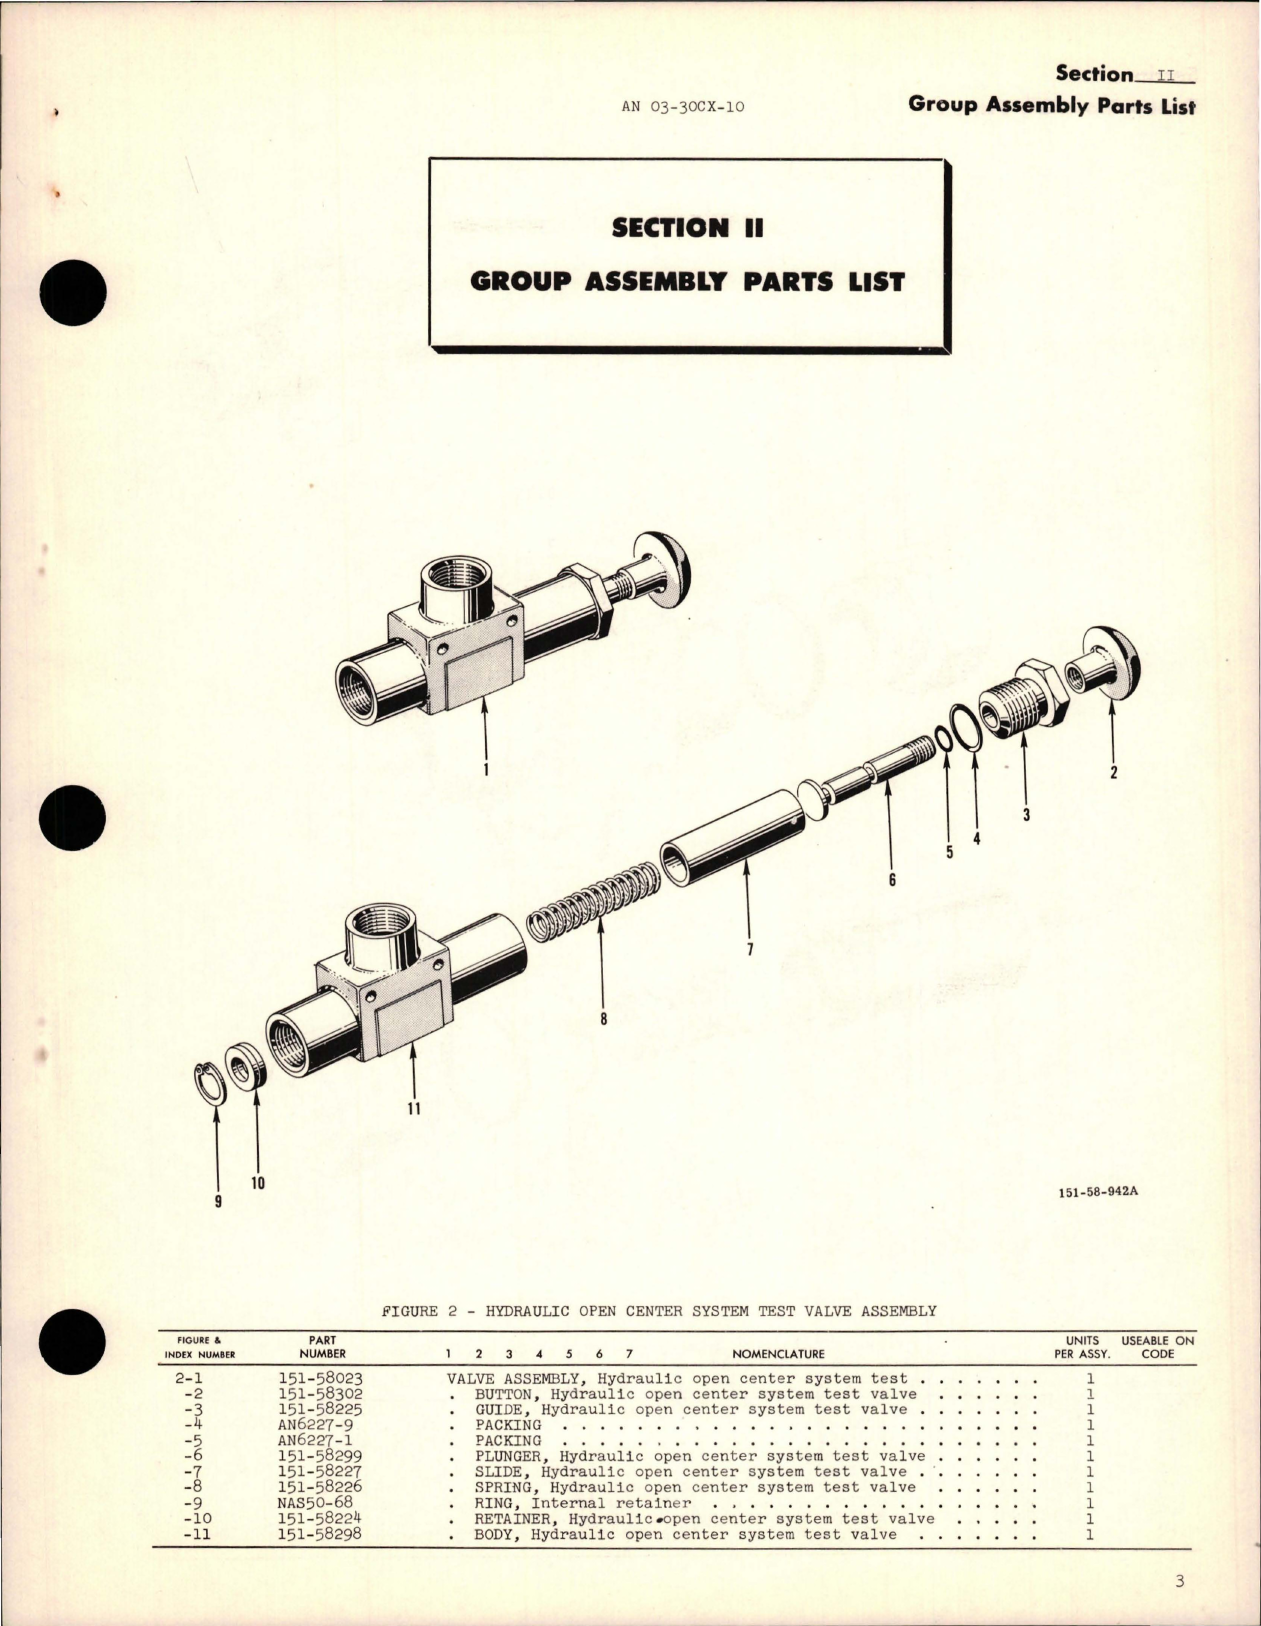 Sample page 5 from AirCorps Library document: Illustrated Parts Breakdown for Selector, By-Pass, and Shut Off Hydraulic Valves 